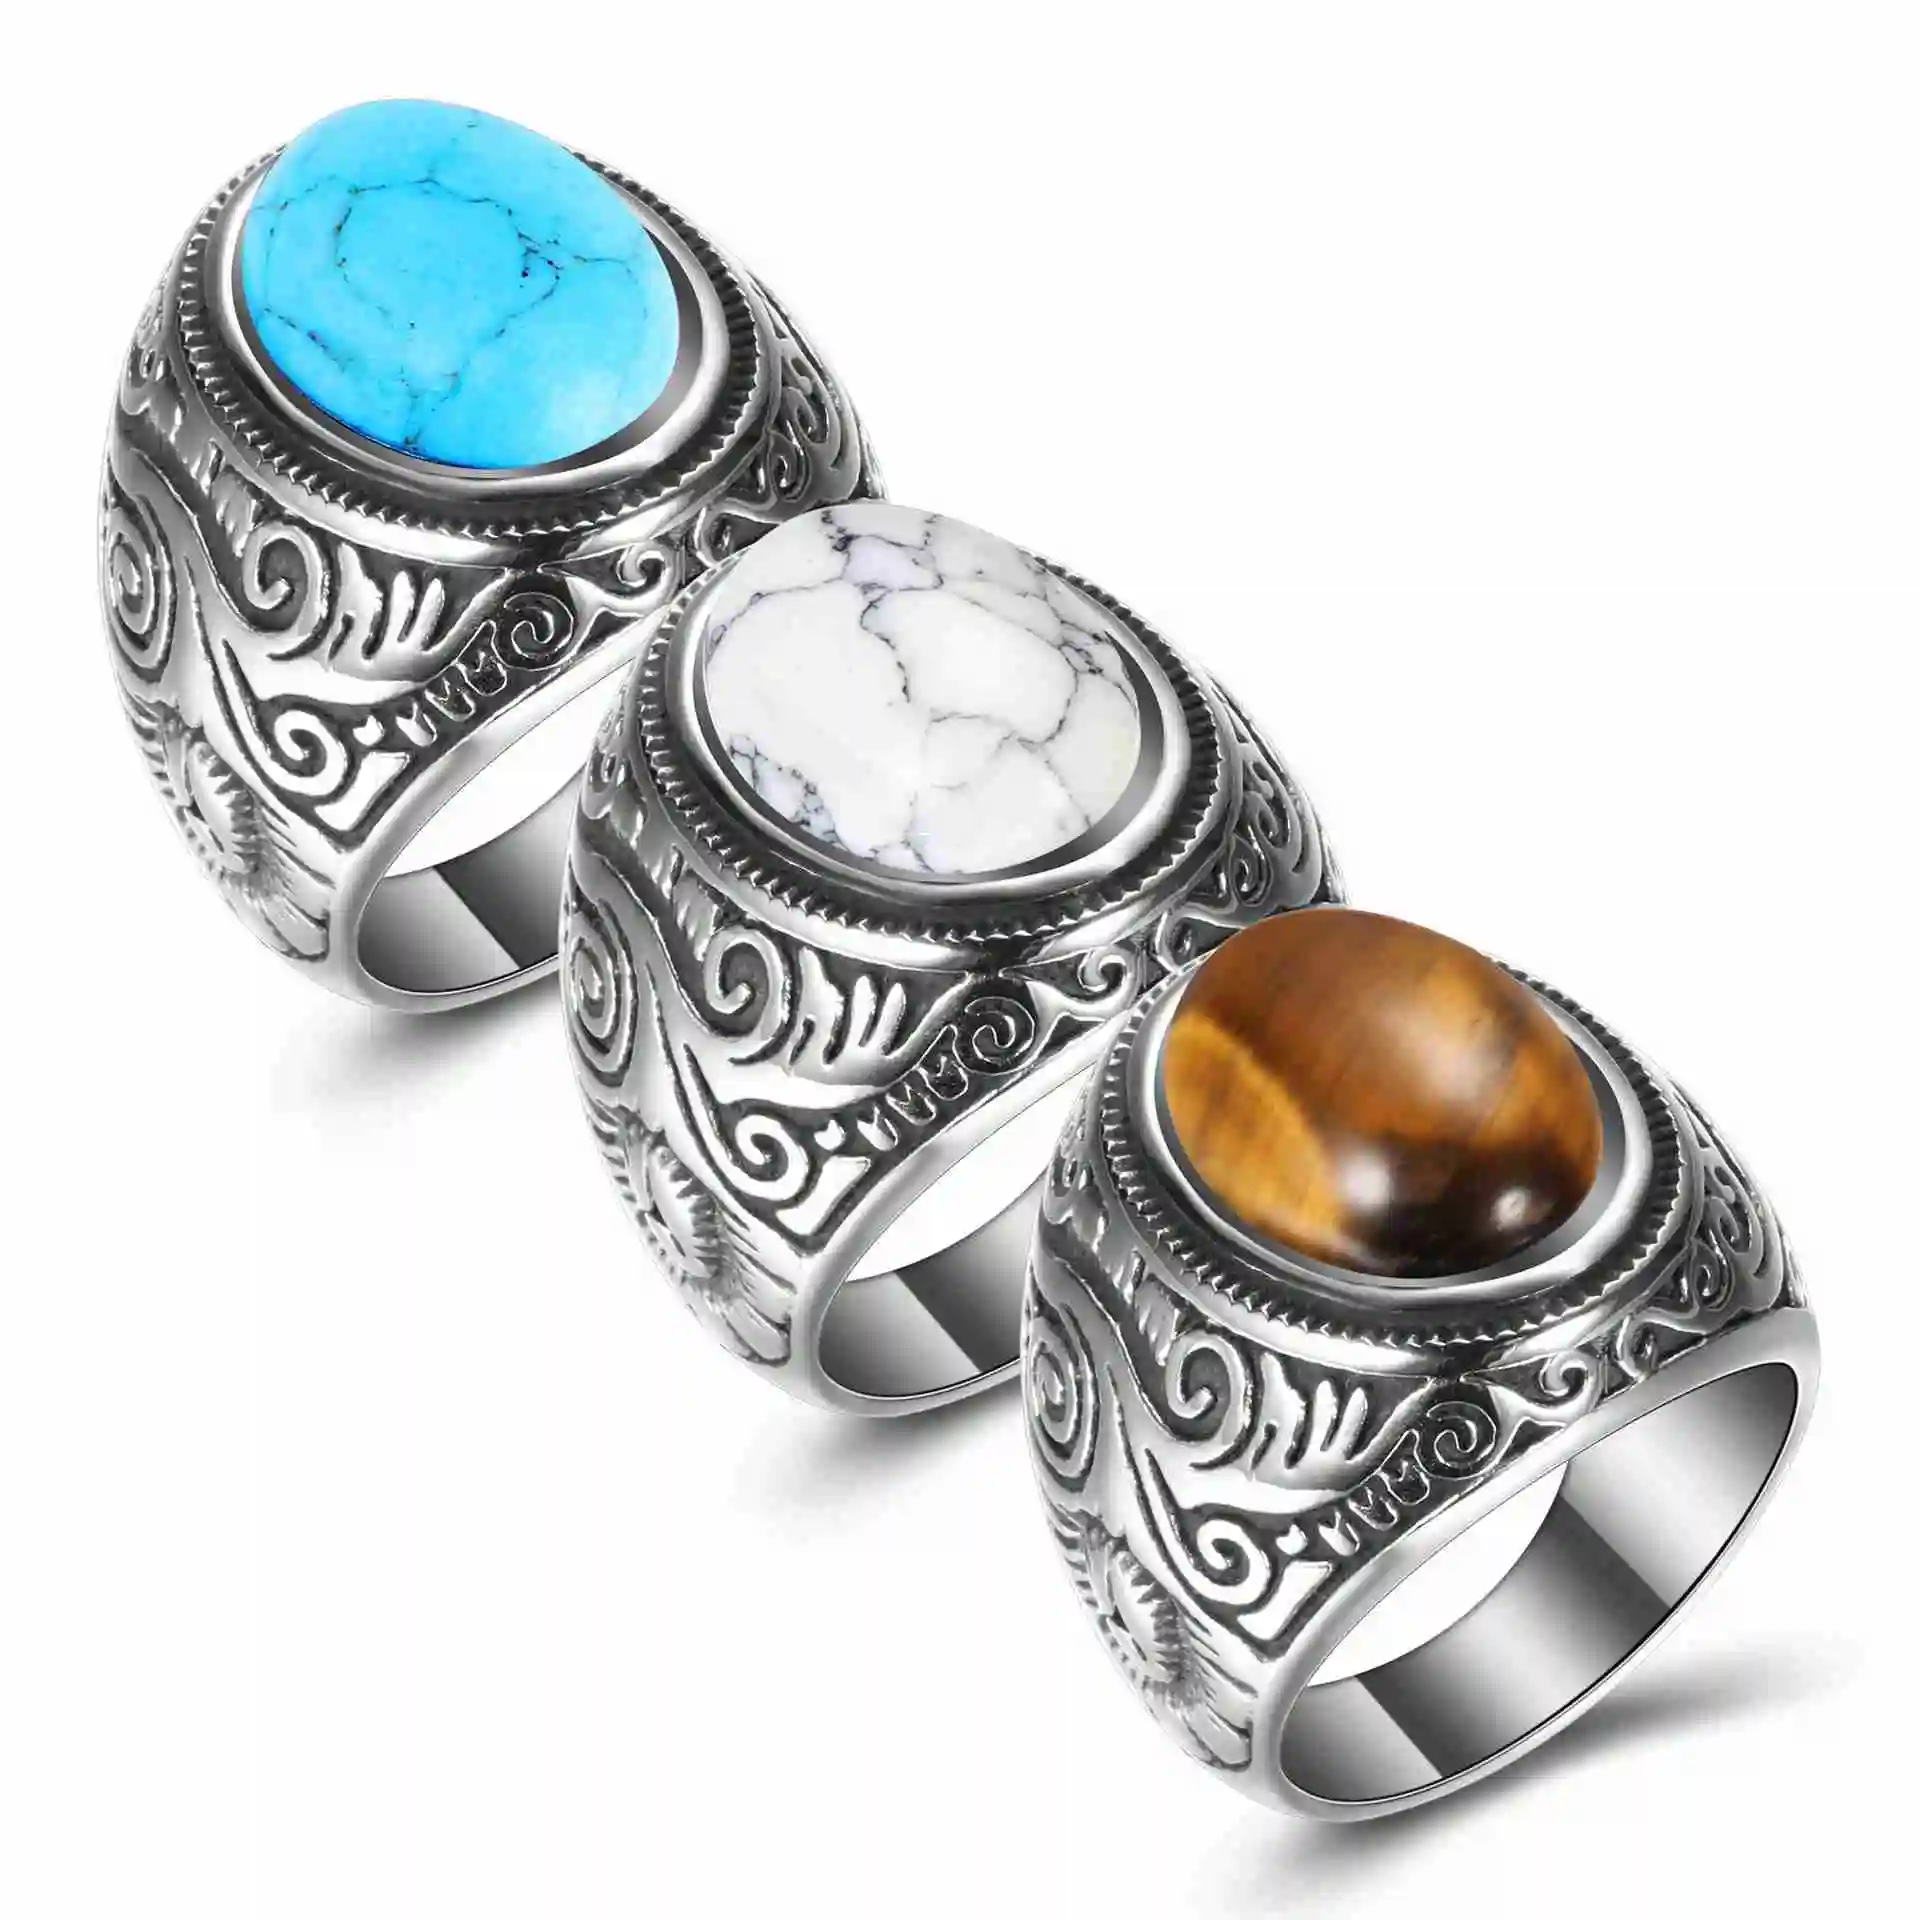 wholesale gemstone turkish ring men jewelry stainless steel mens howlite tiger eye turquoise rings fashion jewelry rings for men